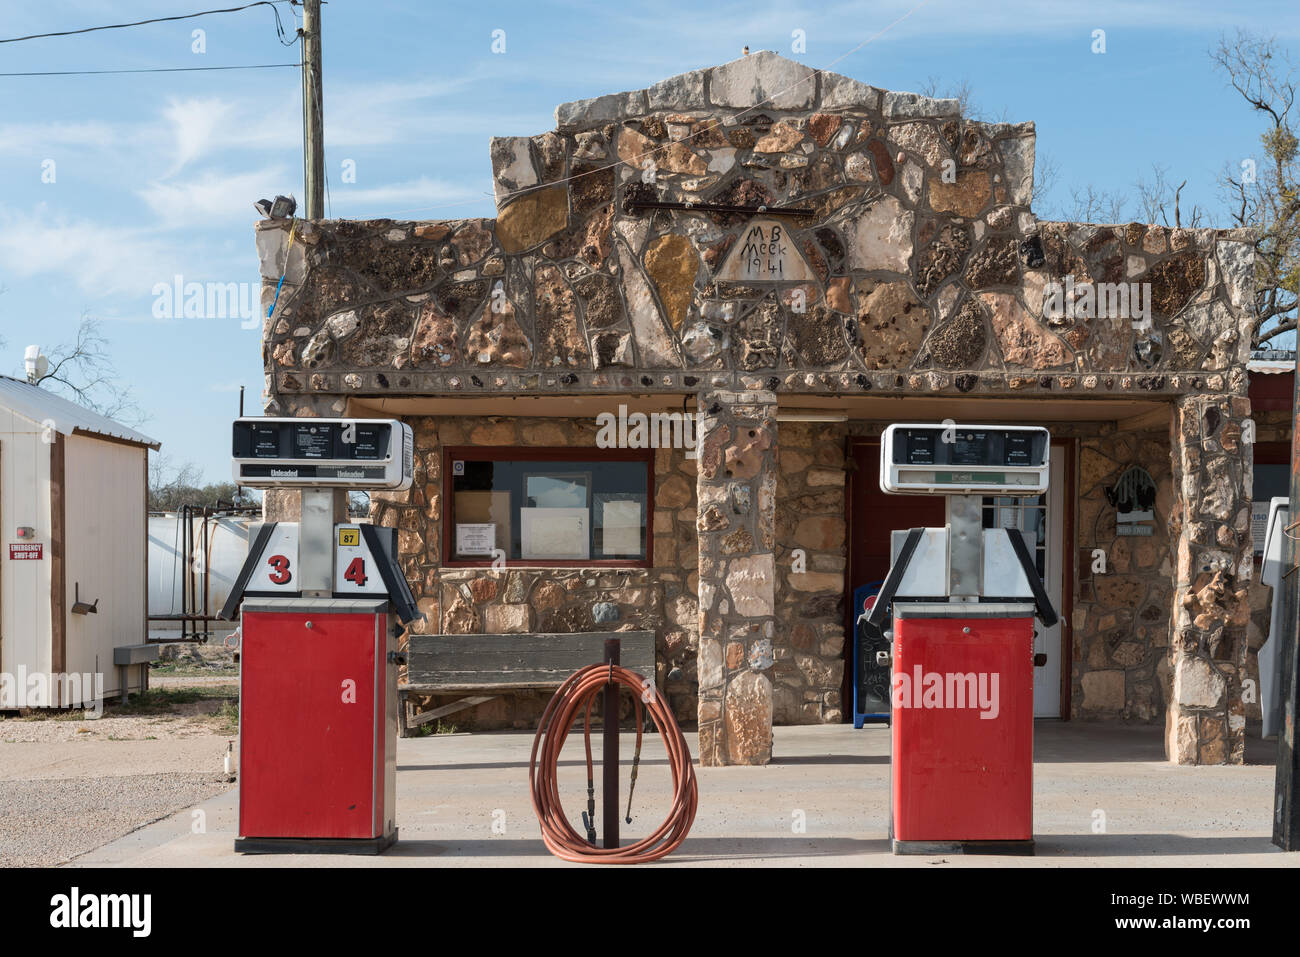 Gas station made of large stones, a common building technique in Texas, in Robert Lee, the county seat of Coke County, Texas Stock Photo